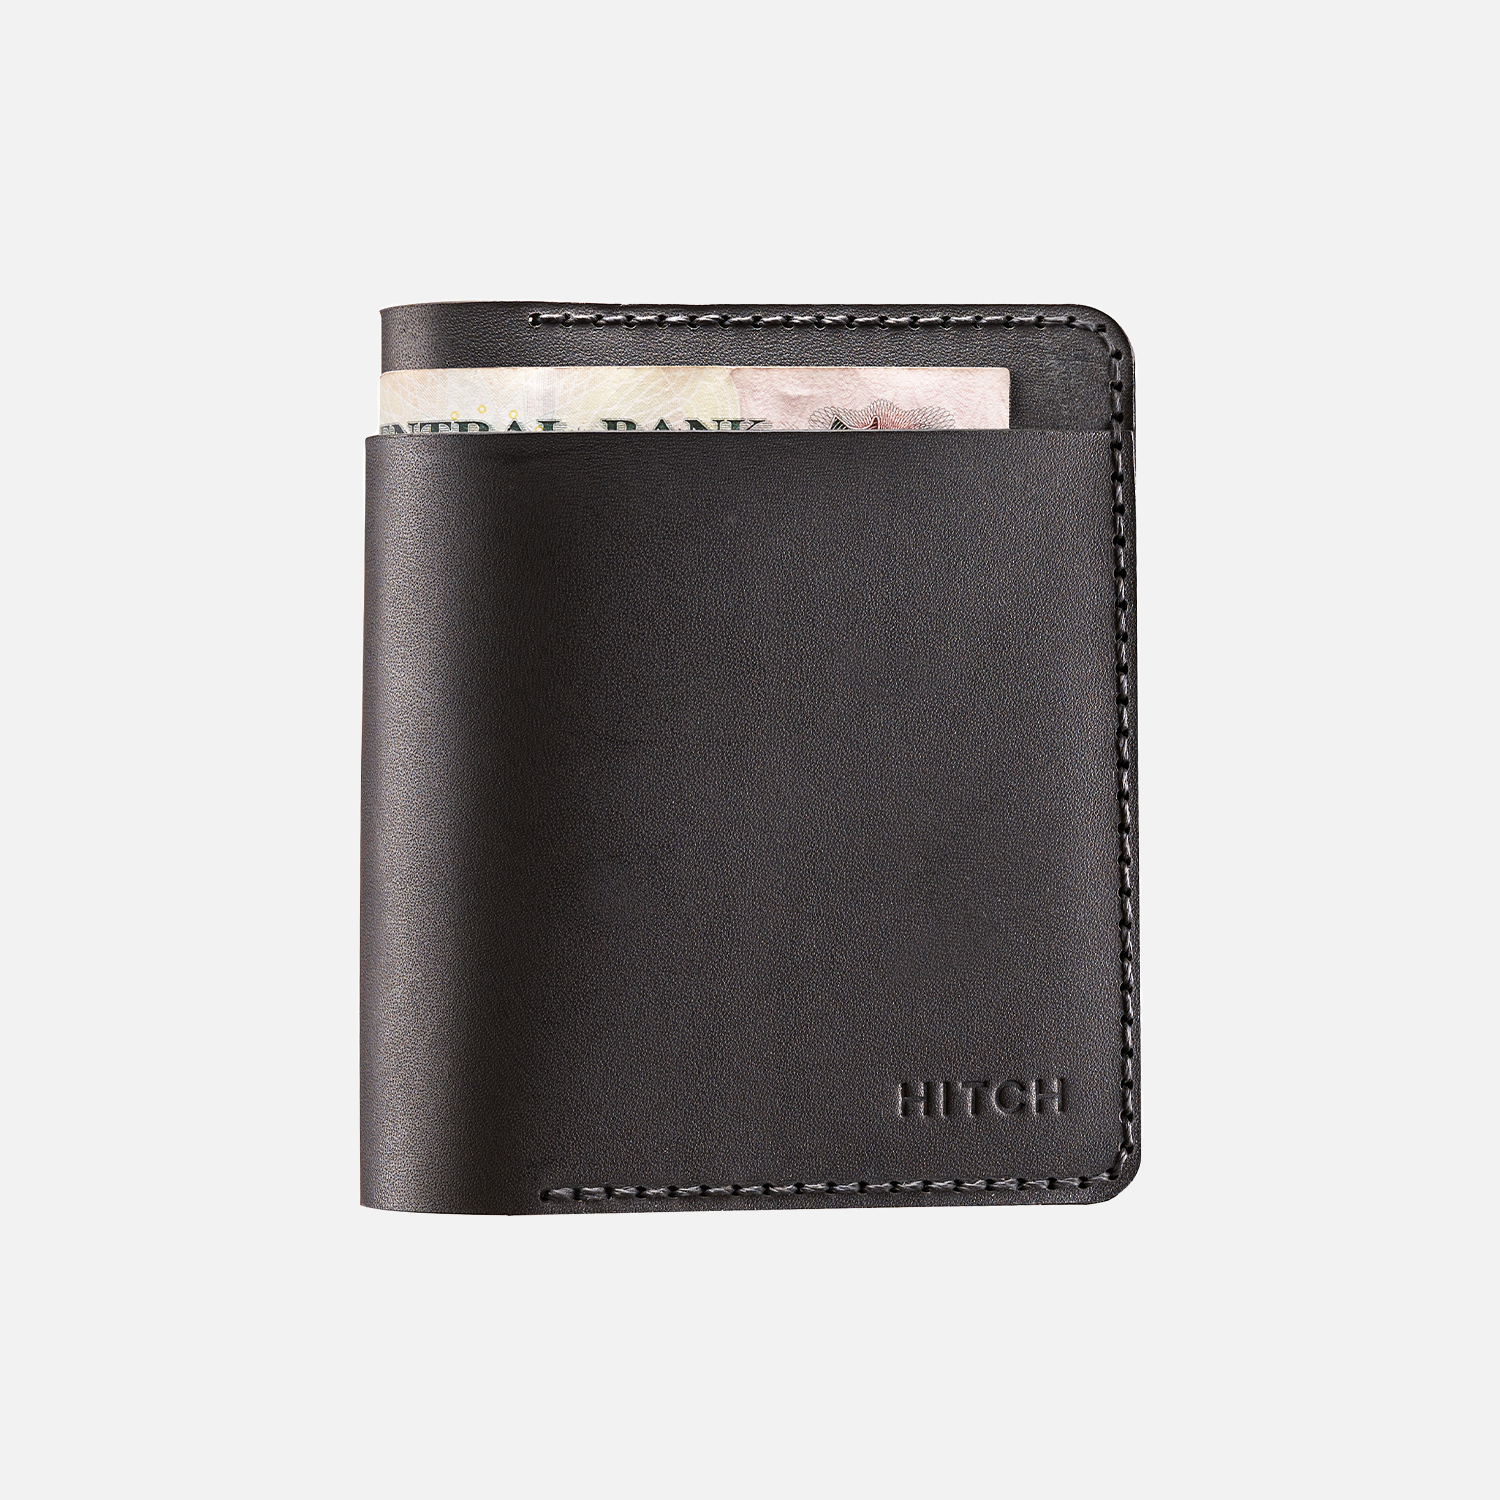 Black leather bifold wallet with cash peeking out and 'HITCH' branding on a white background.